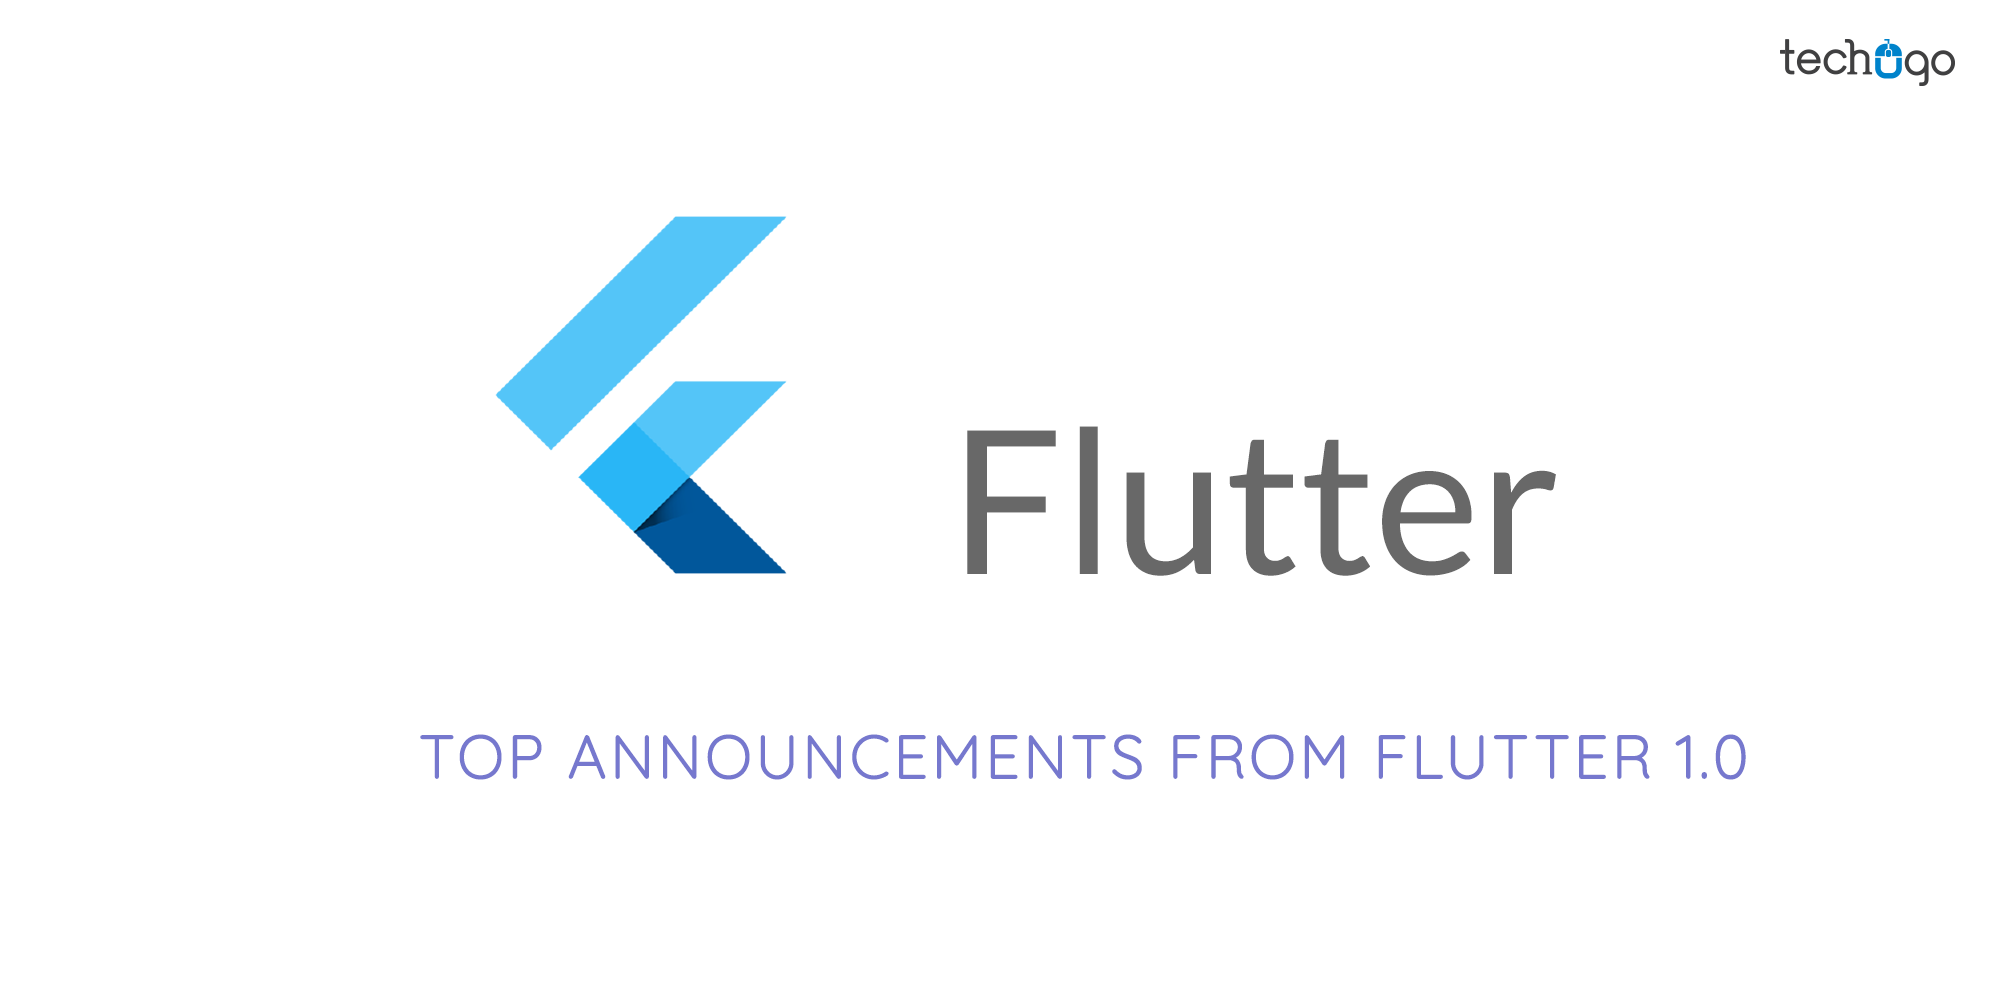 Top Announcements From Flutter 1.0